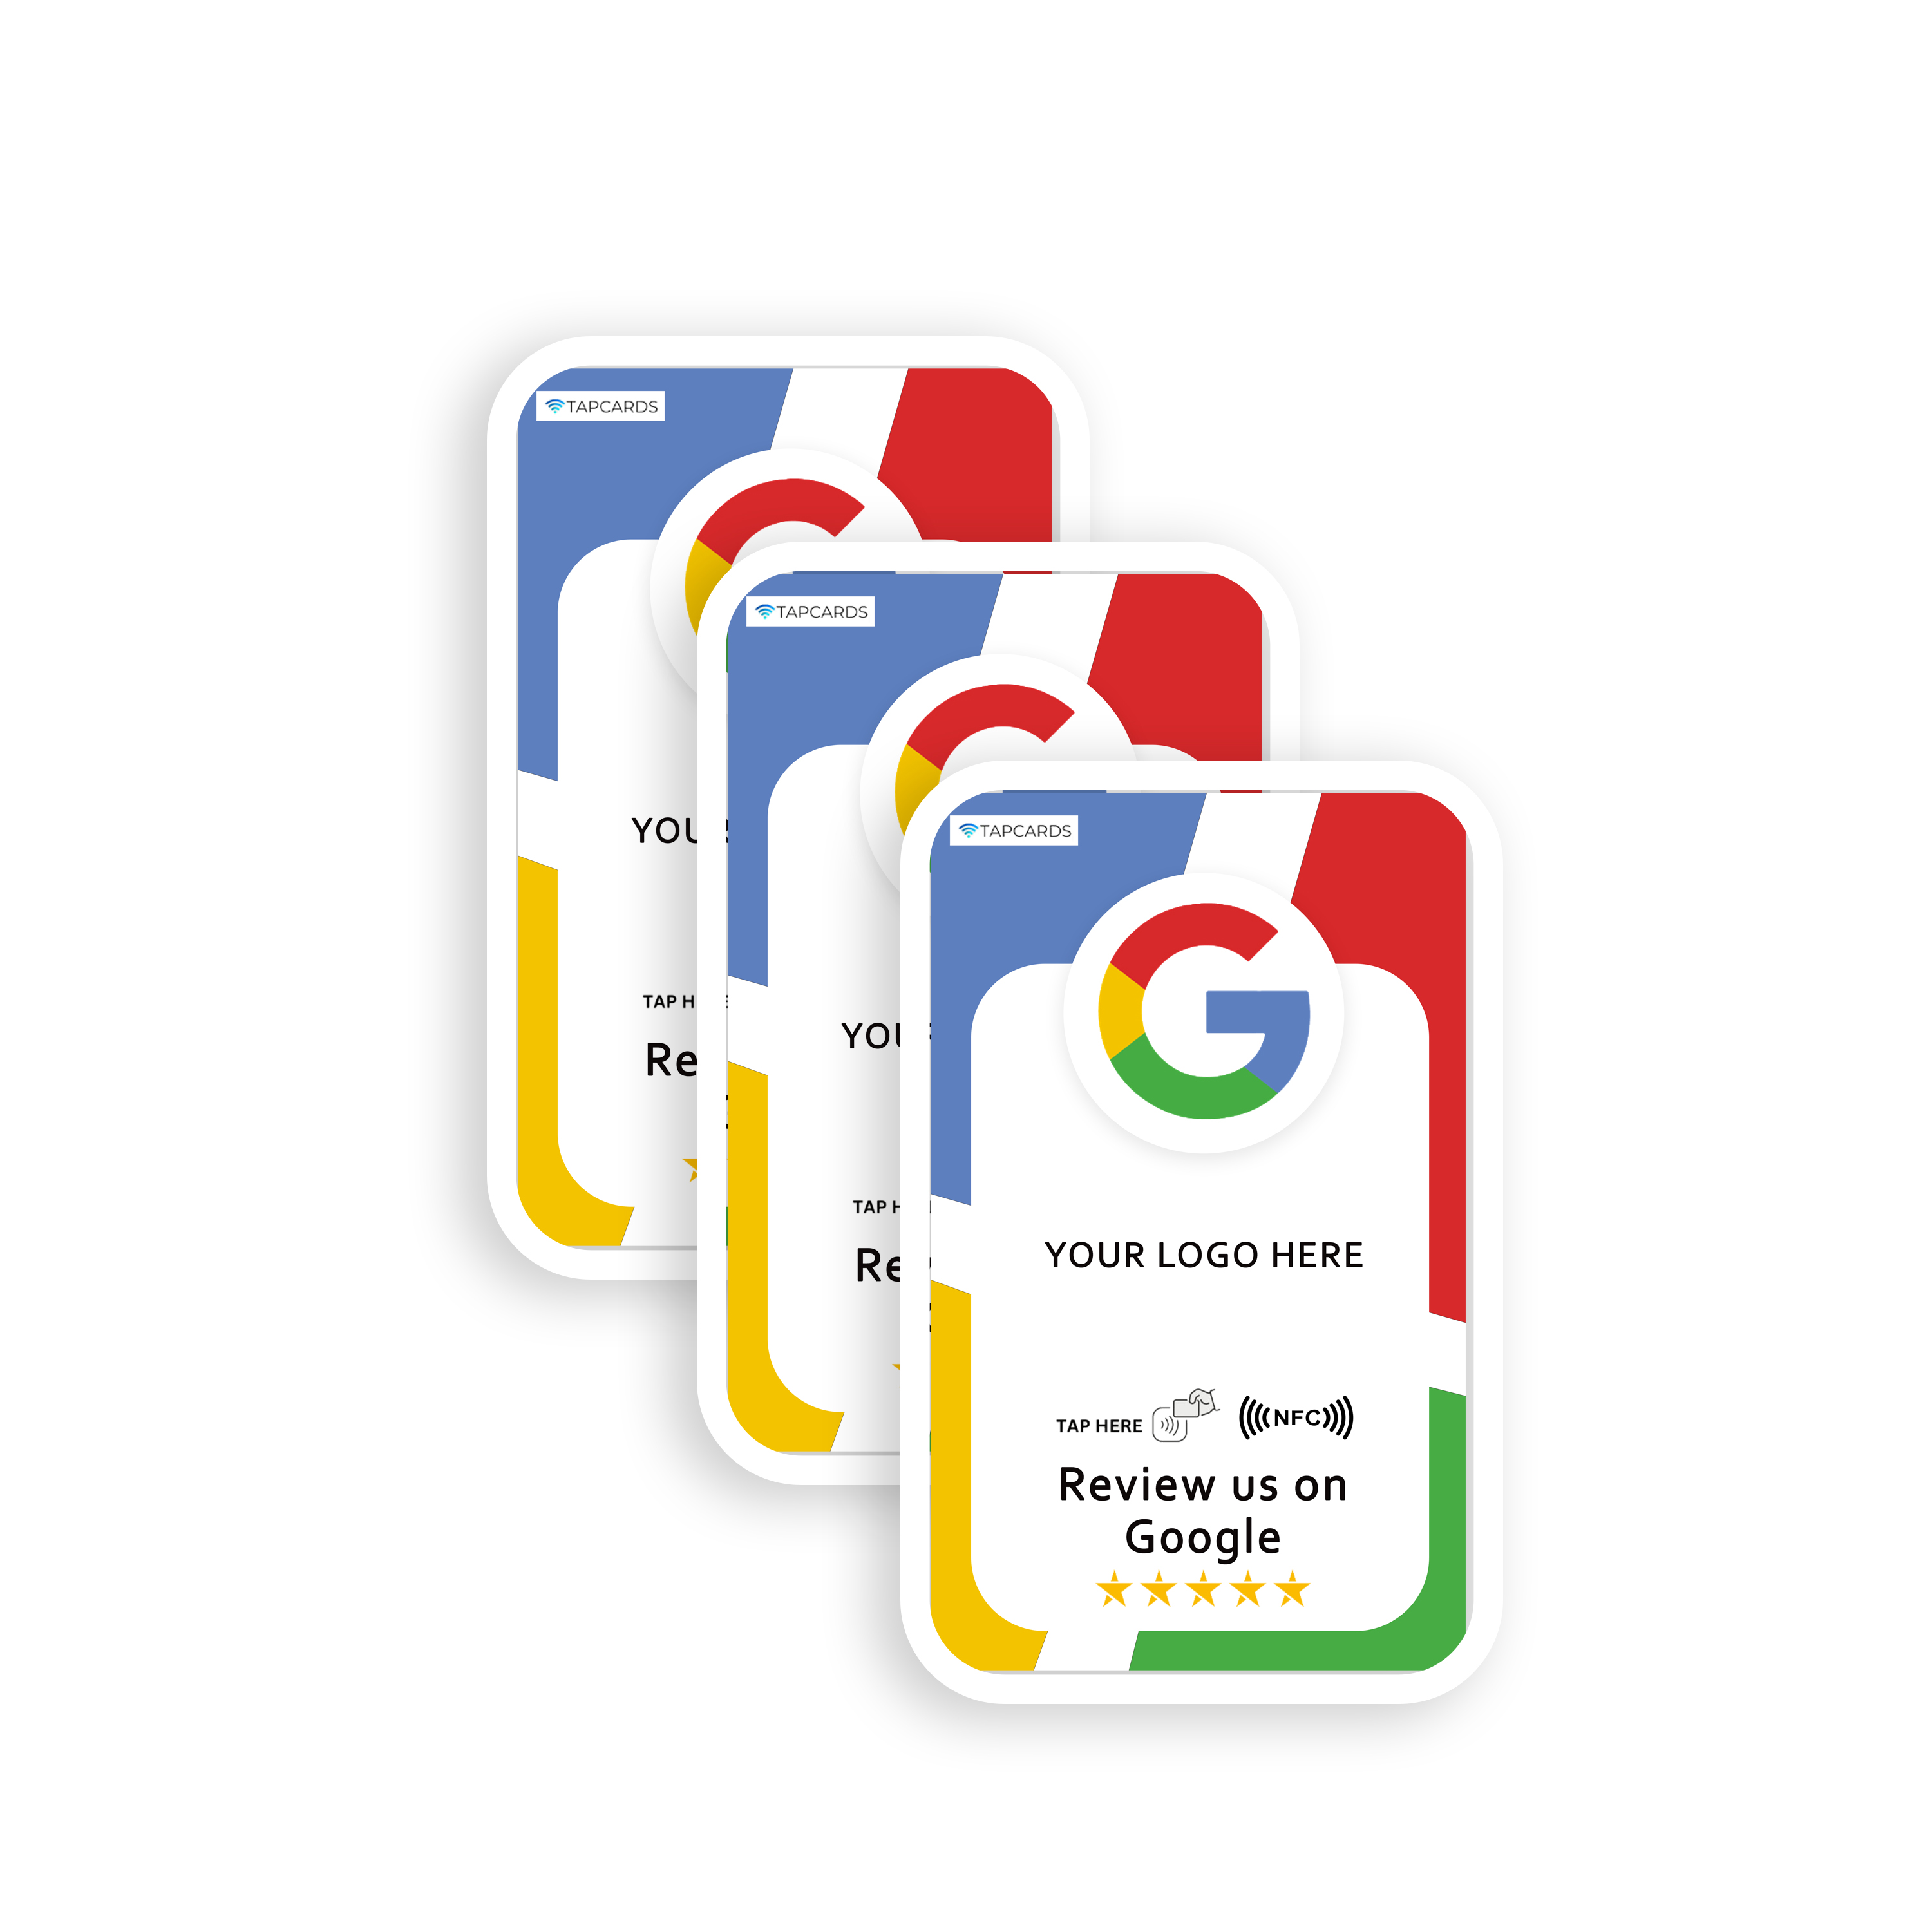 2X TAPCARD Google Review Card - Contactless Review Cards - TAPCARDS